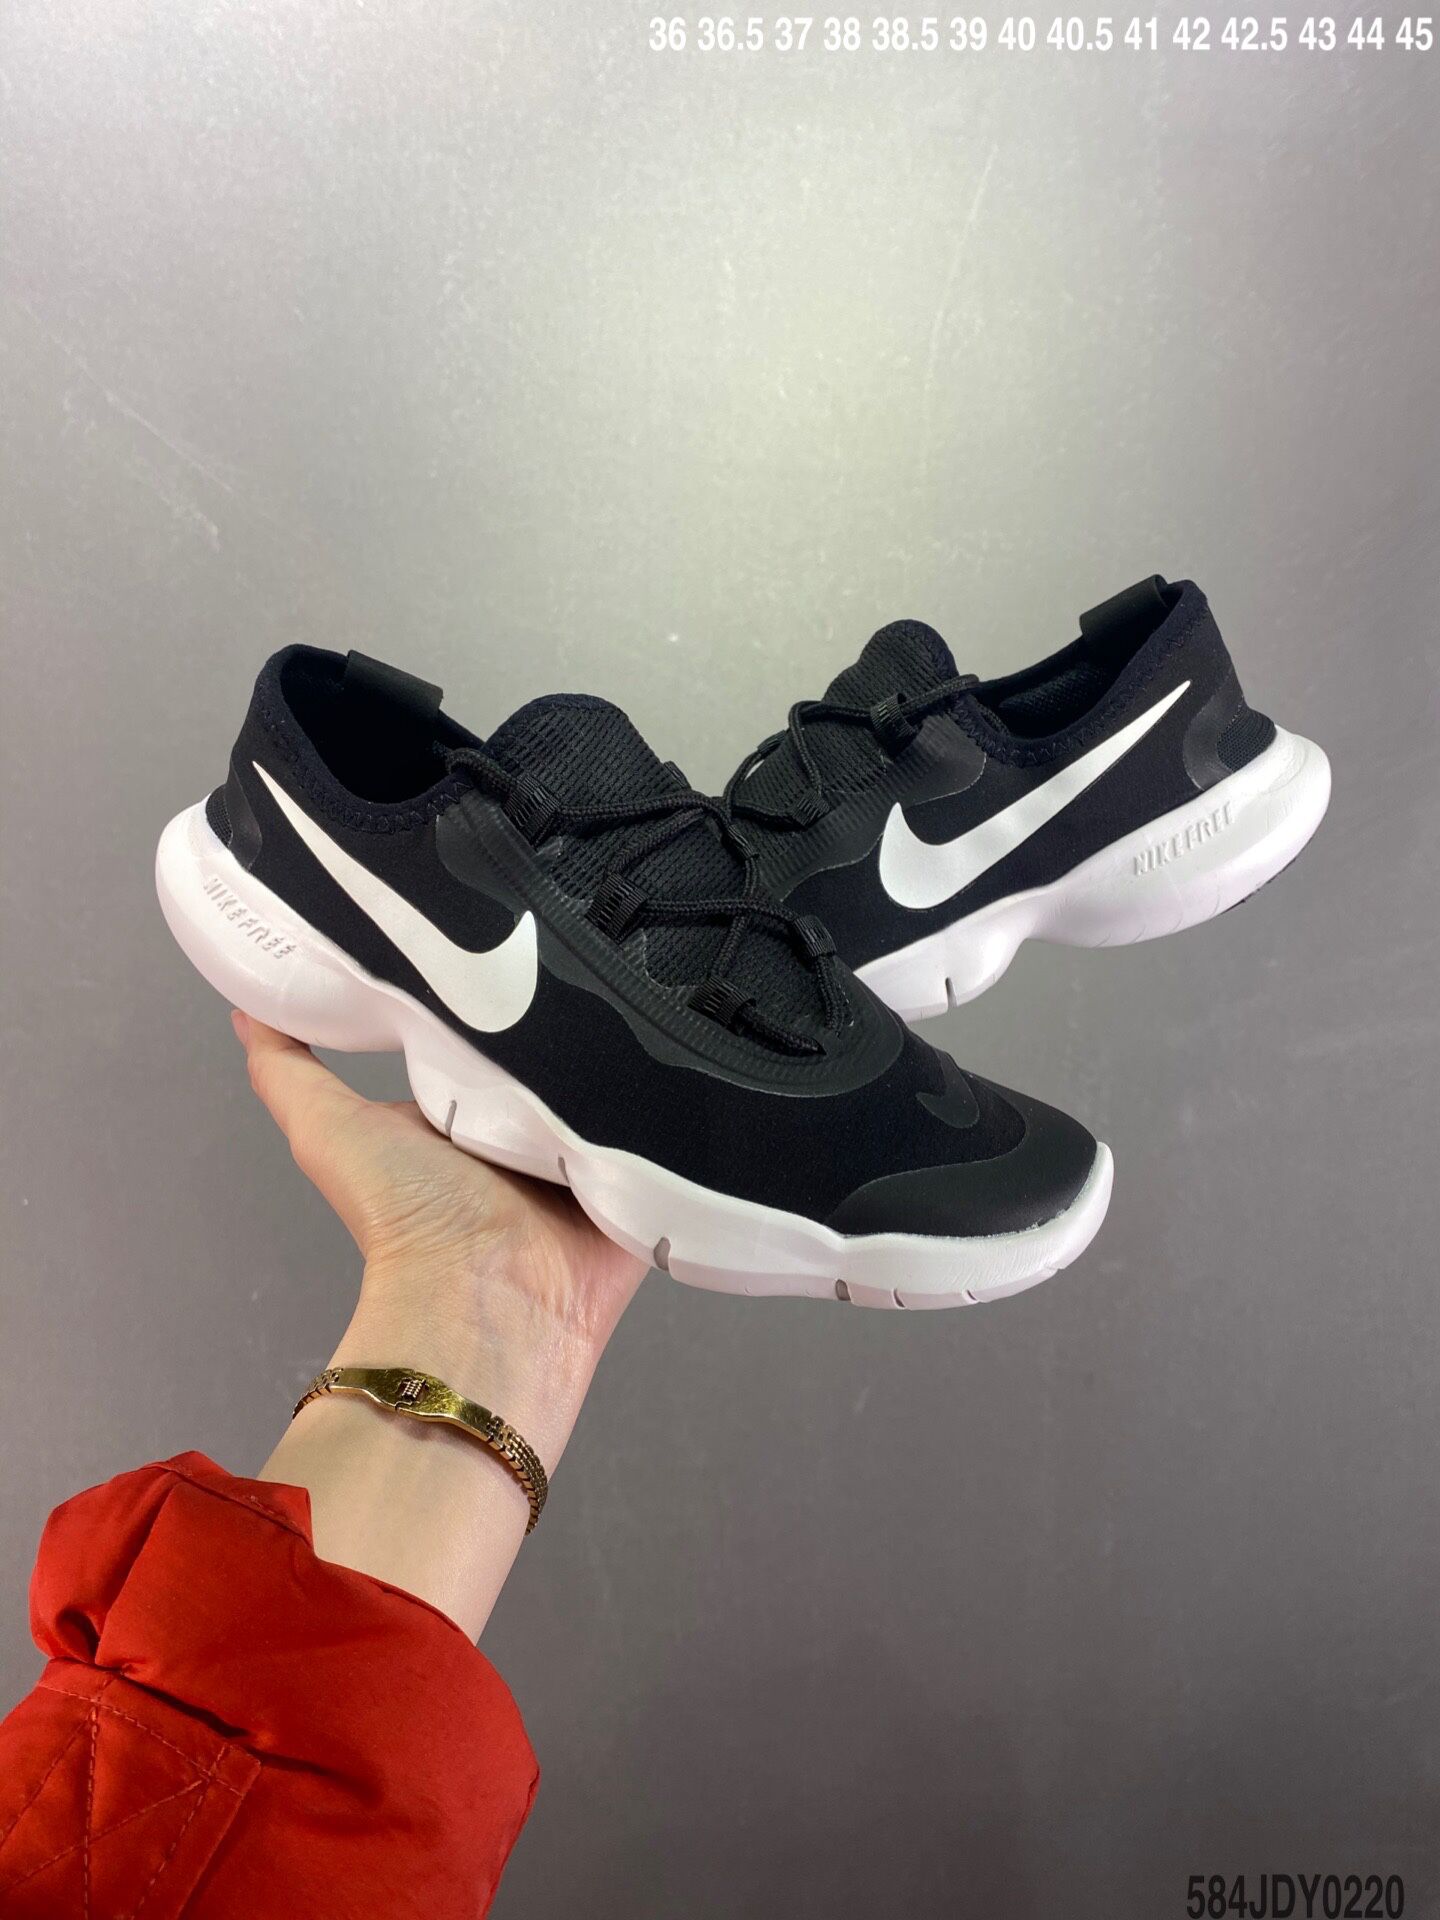 New Women Nike Free 2.0 Flyknit Black White Shoes - Click Image to Close